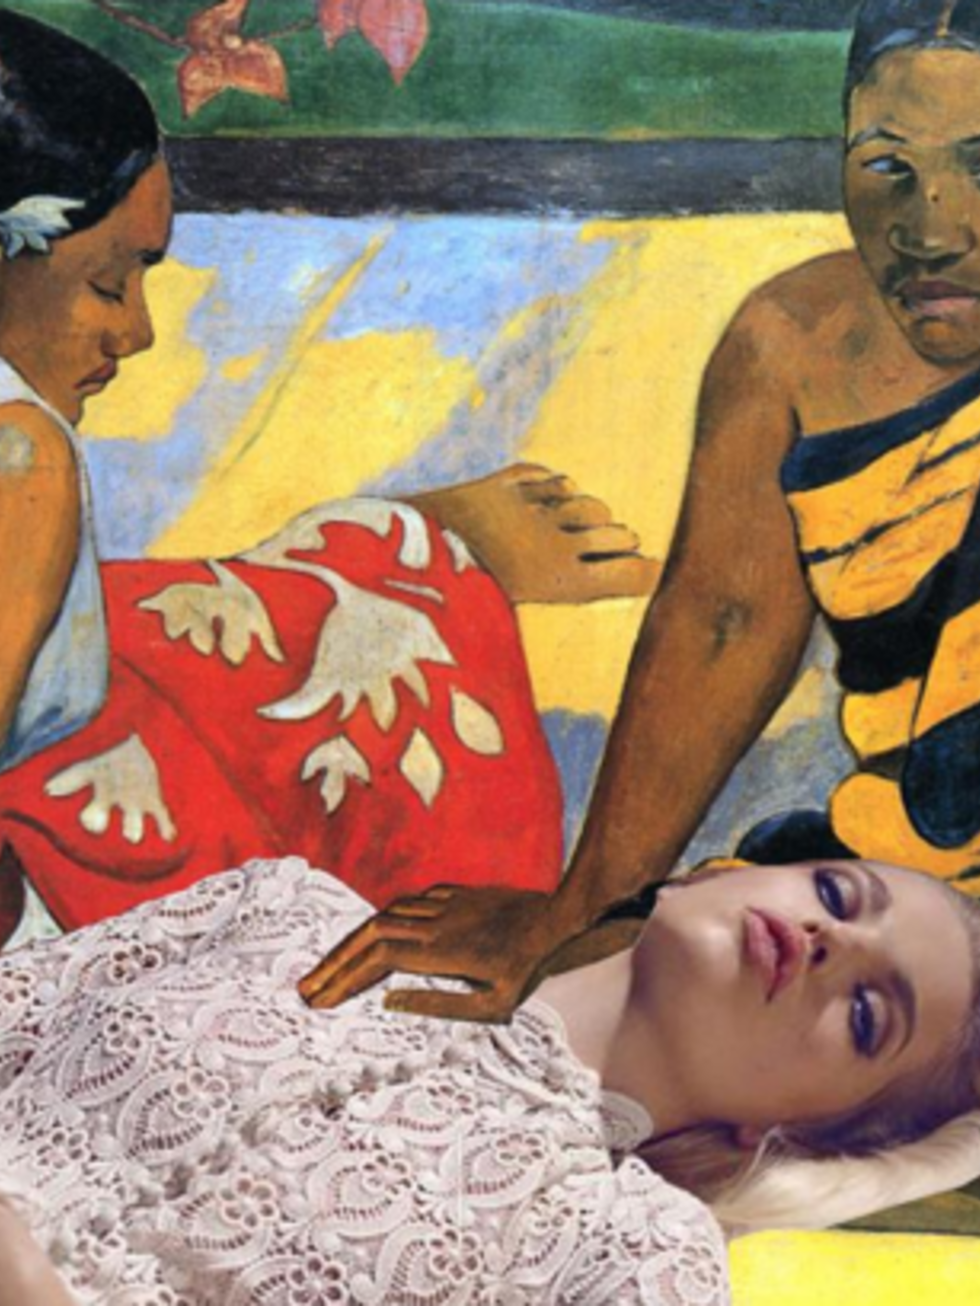 &quot;Stay Still, Gauguin is Going to Make Us Immortal!&quot; Painting: Parau Api by Gauguin Ph: @daphnegroeneveld f